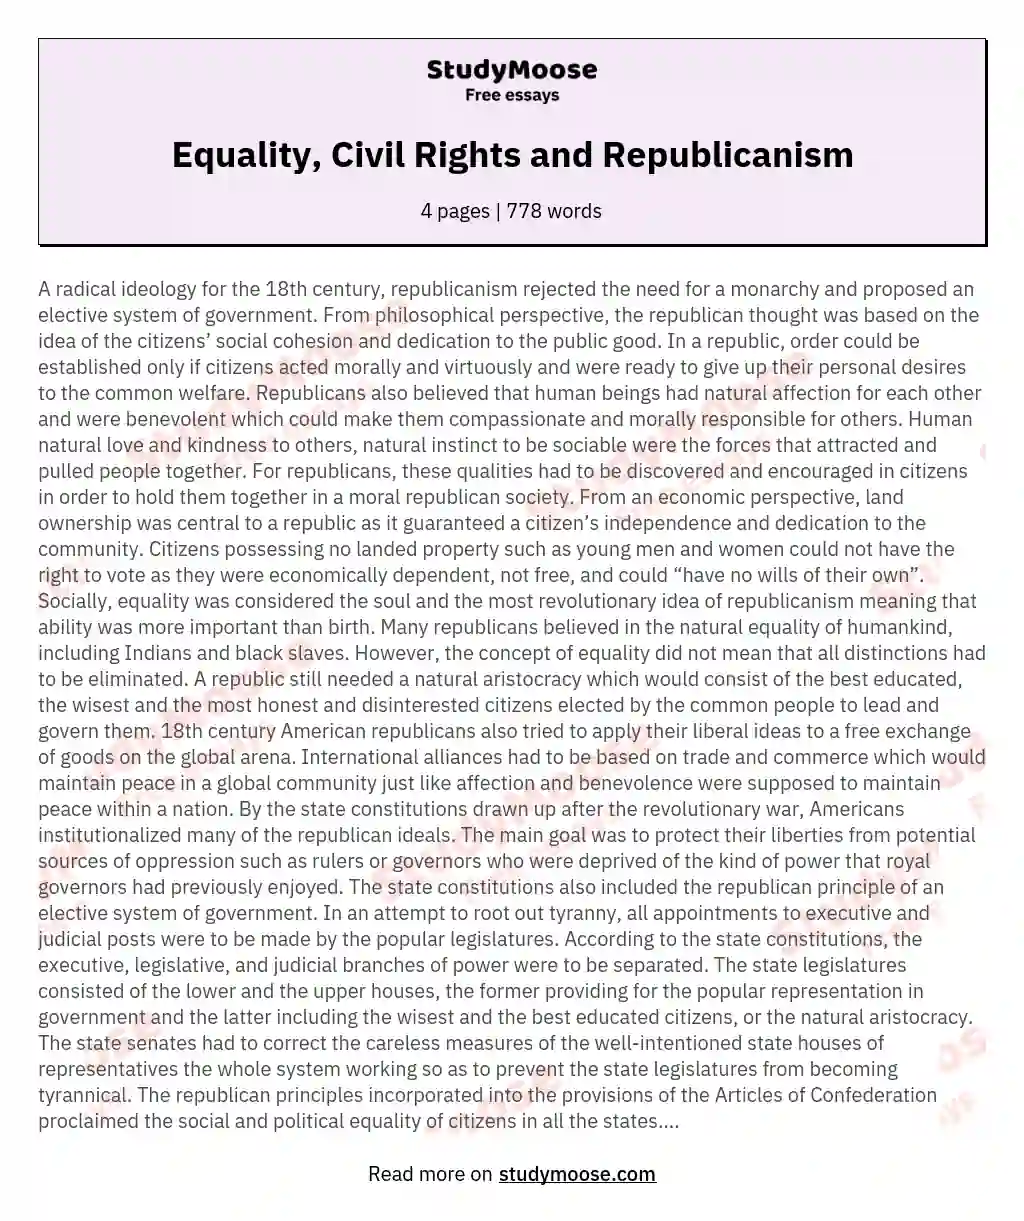 Equality, Civil Rights and Republicanism essay